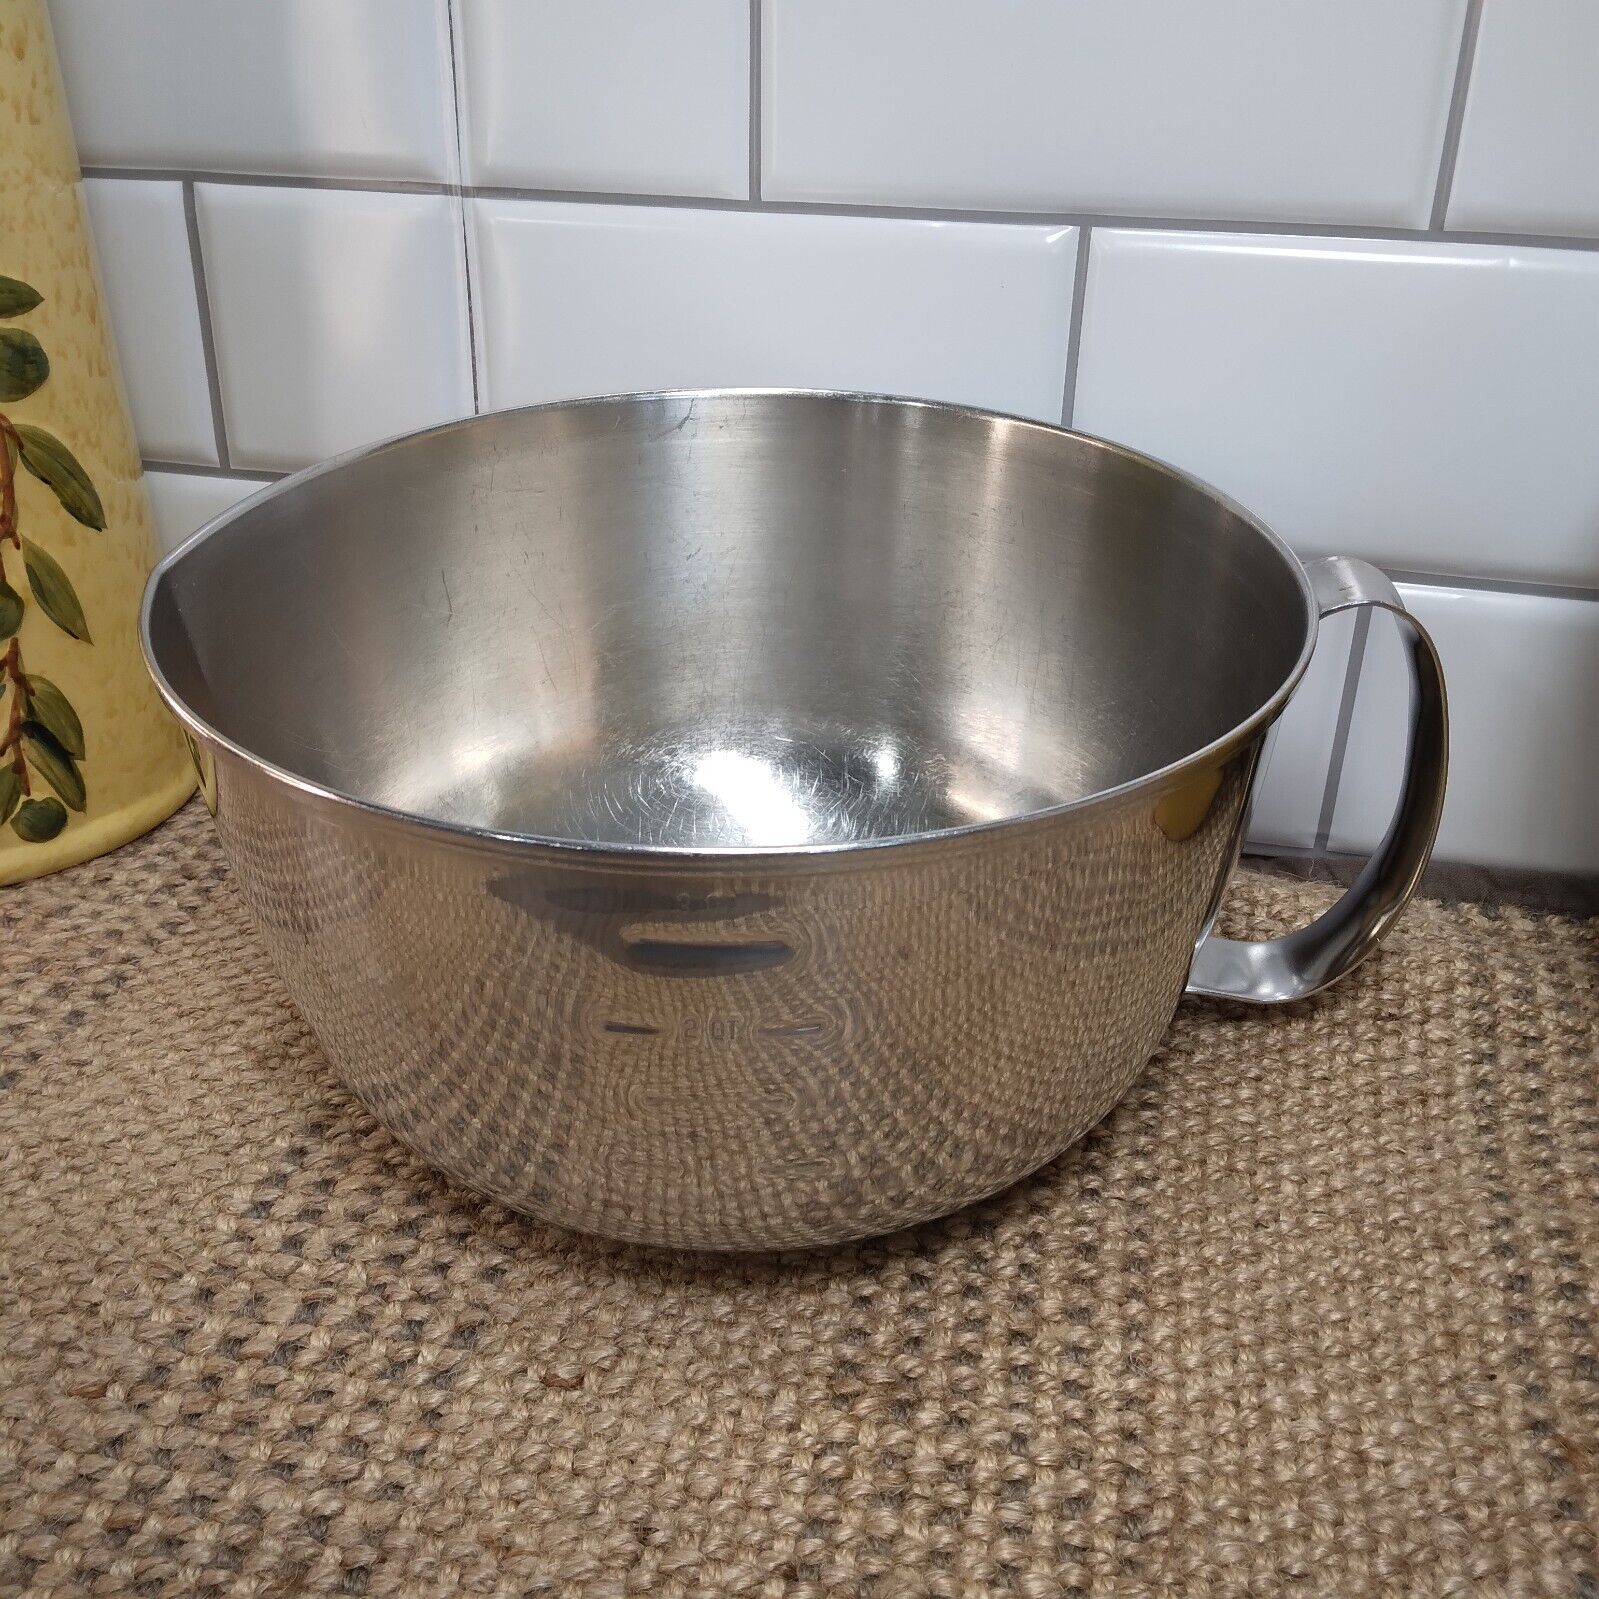 Vintage West Bend Stainless Grip N Whip Handle Mixing Bowl 3qt Nice